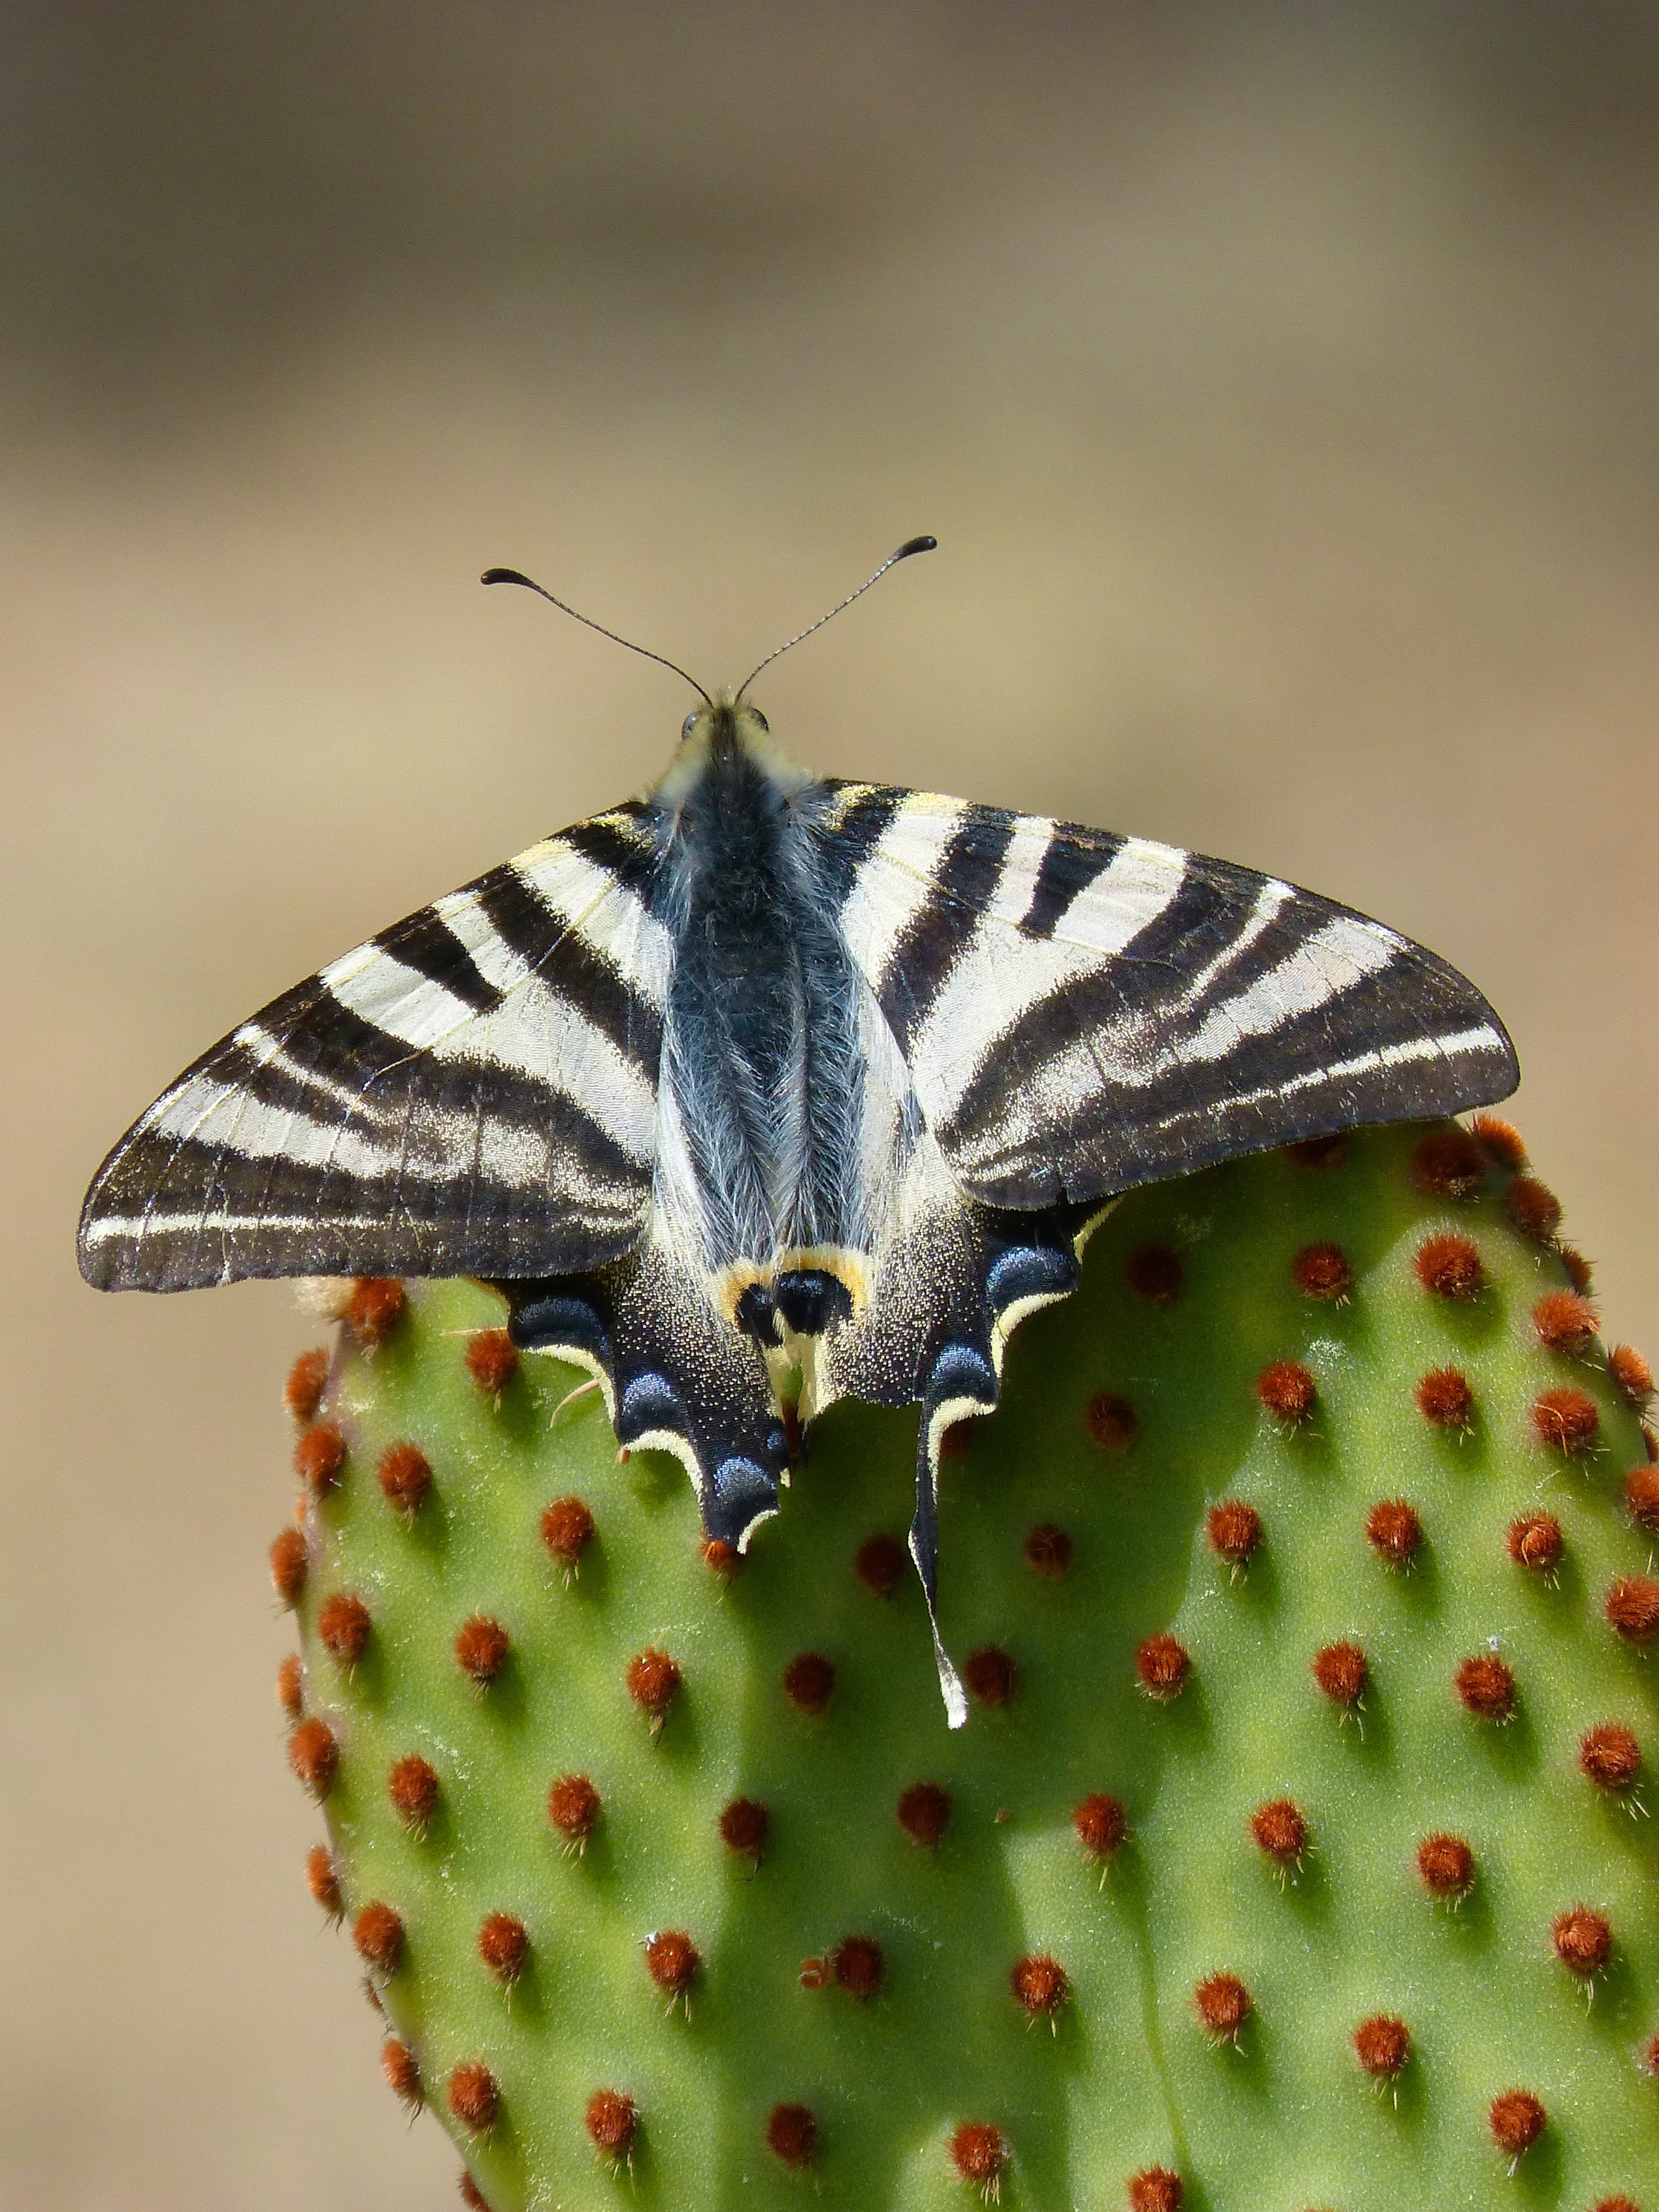 black and white banded  moth on green and red cactus in shallow focus lens